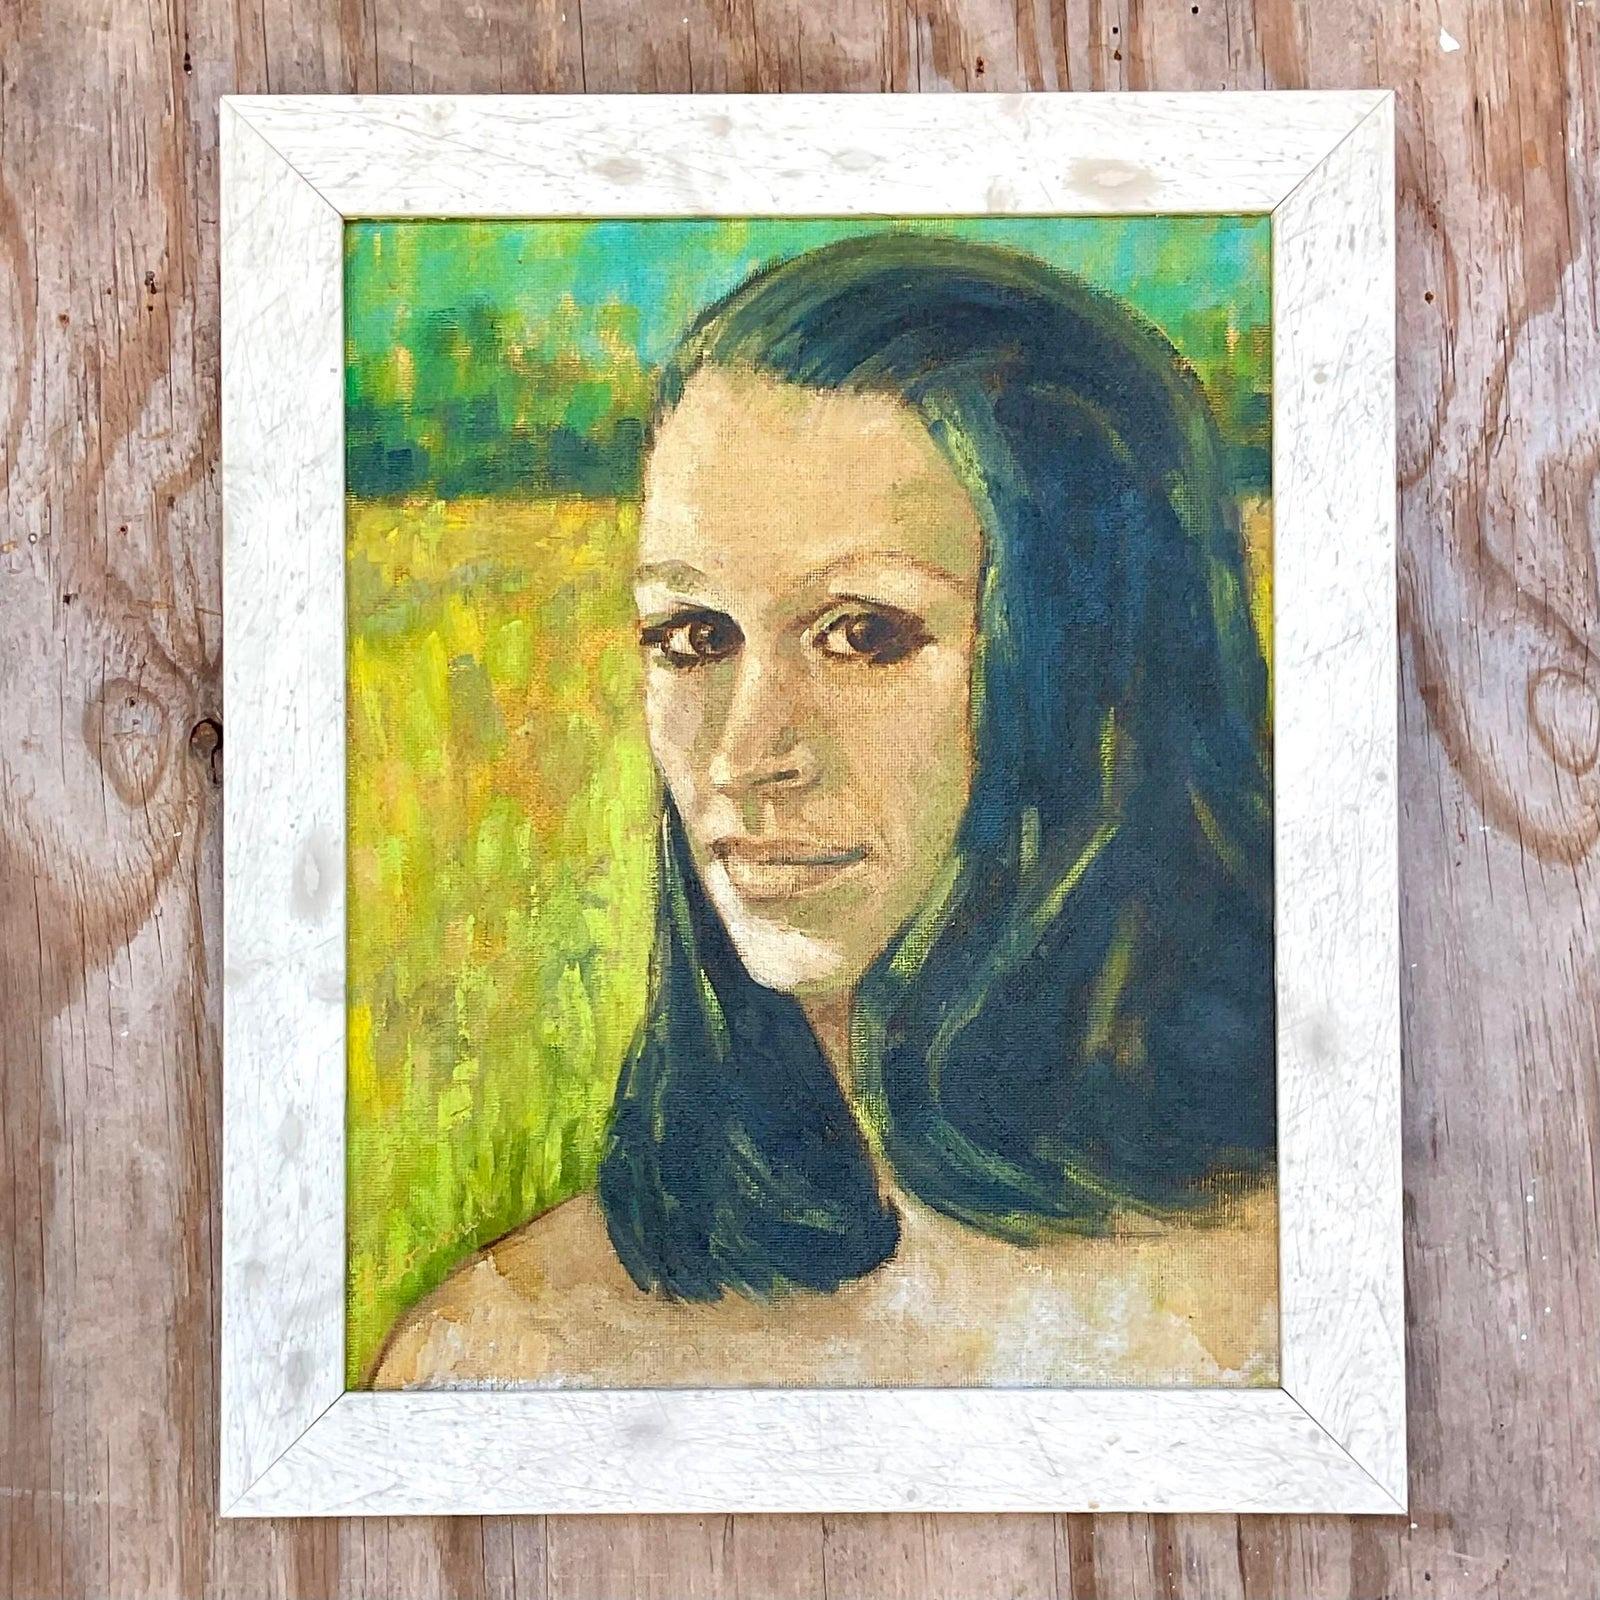 A fabulous vintage Boho oil portrait on canvas. A chic young woman in bright clear colors. Framed in a cerused Burl wood frame. Signed by the artist. Acquired from a Palm Beach estate